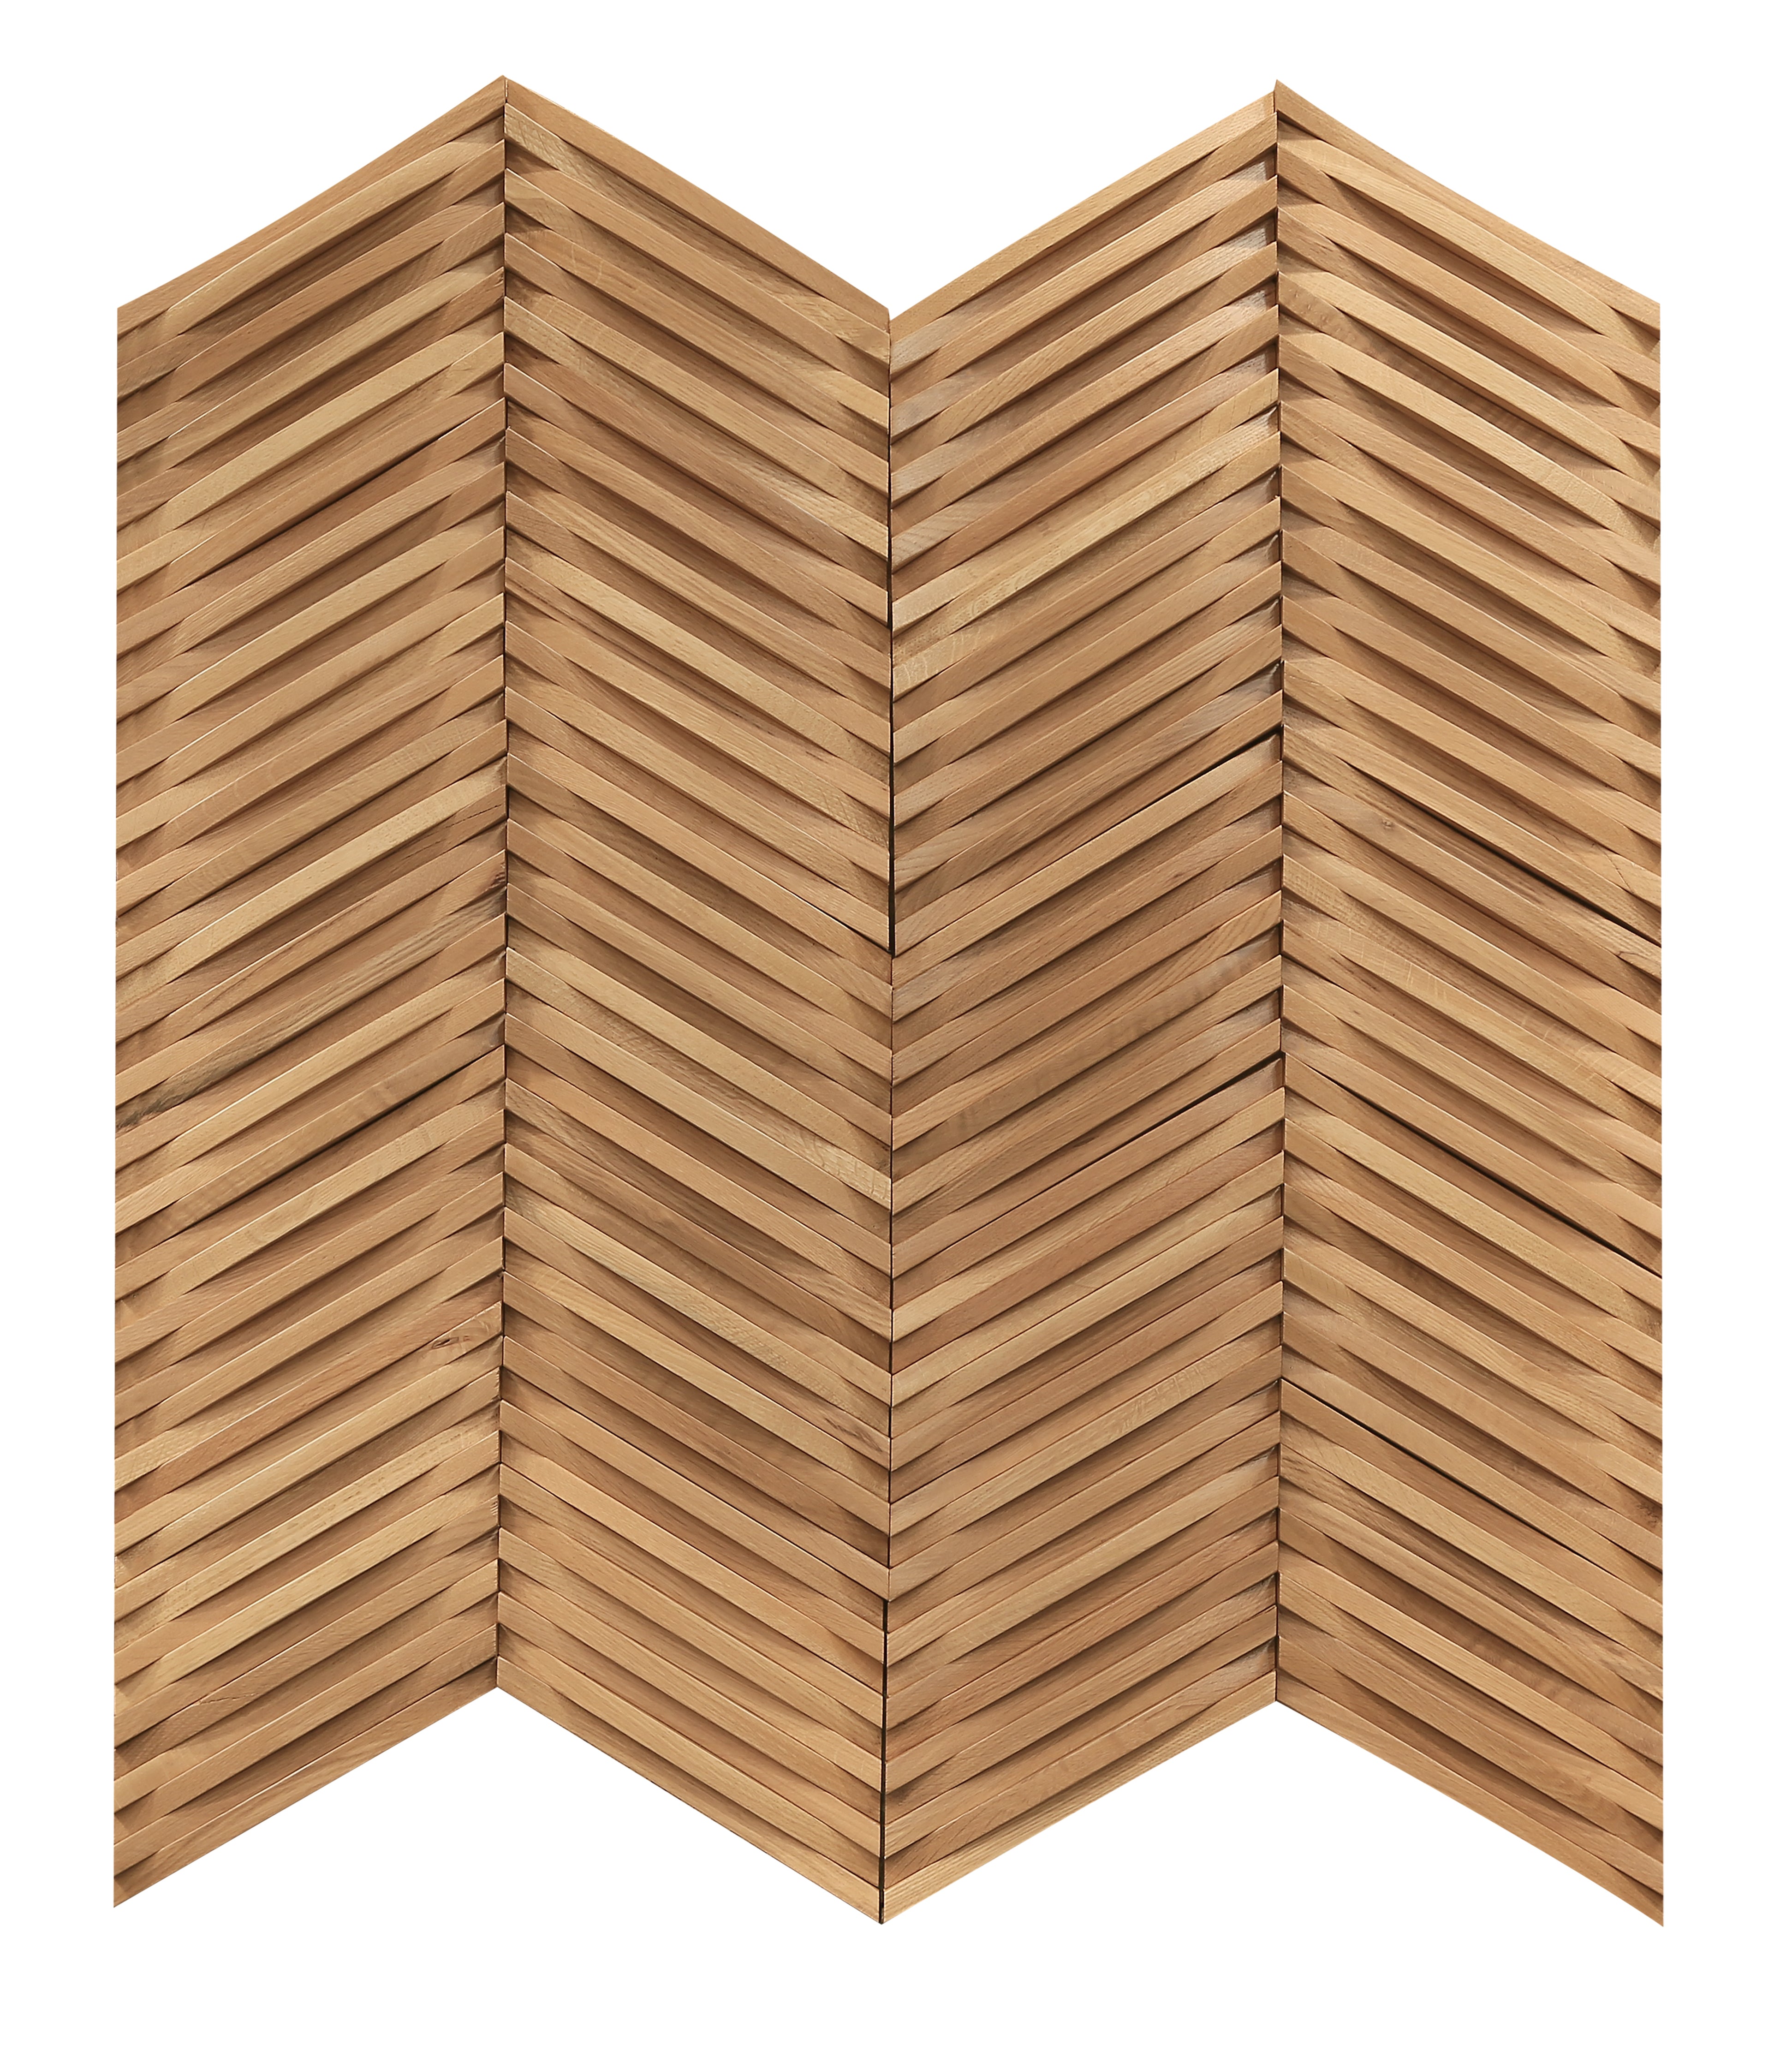 duchateau inceptiv curva chevron sand oak three dimensional wall natural wood panel lacquer for interior use distributed by surface group international